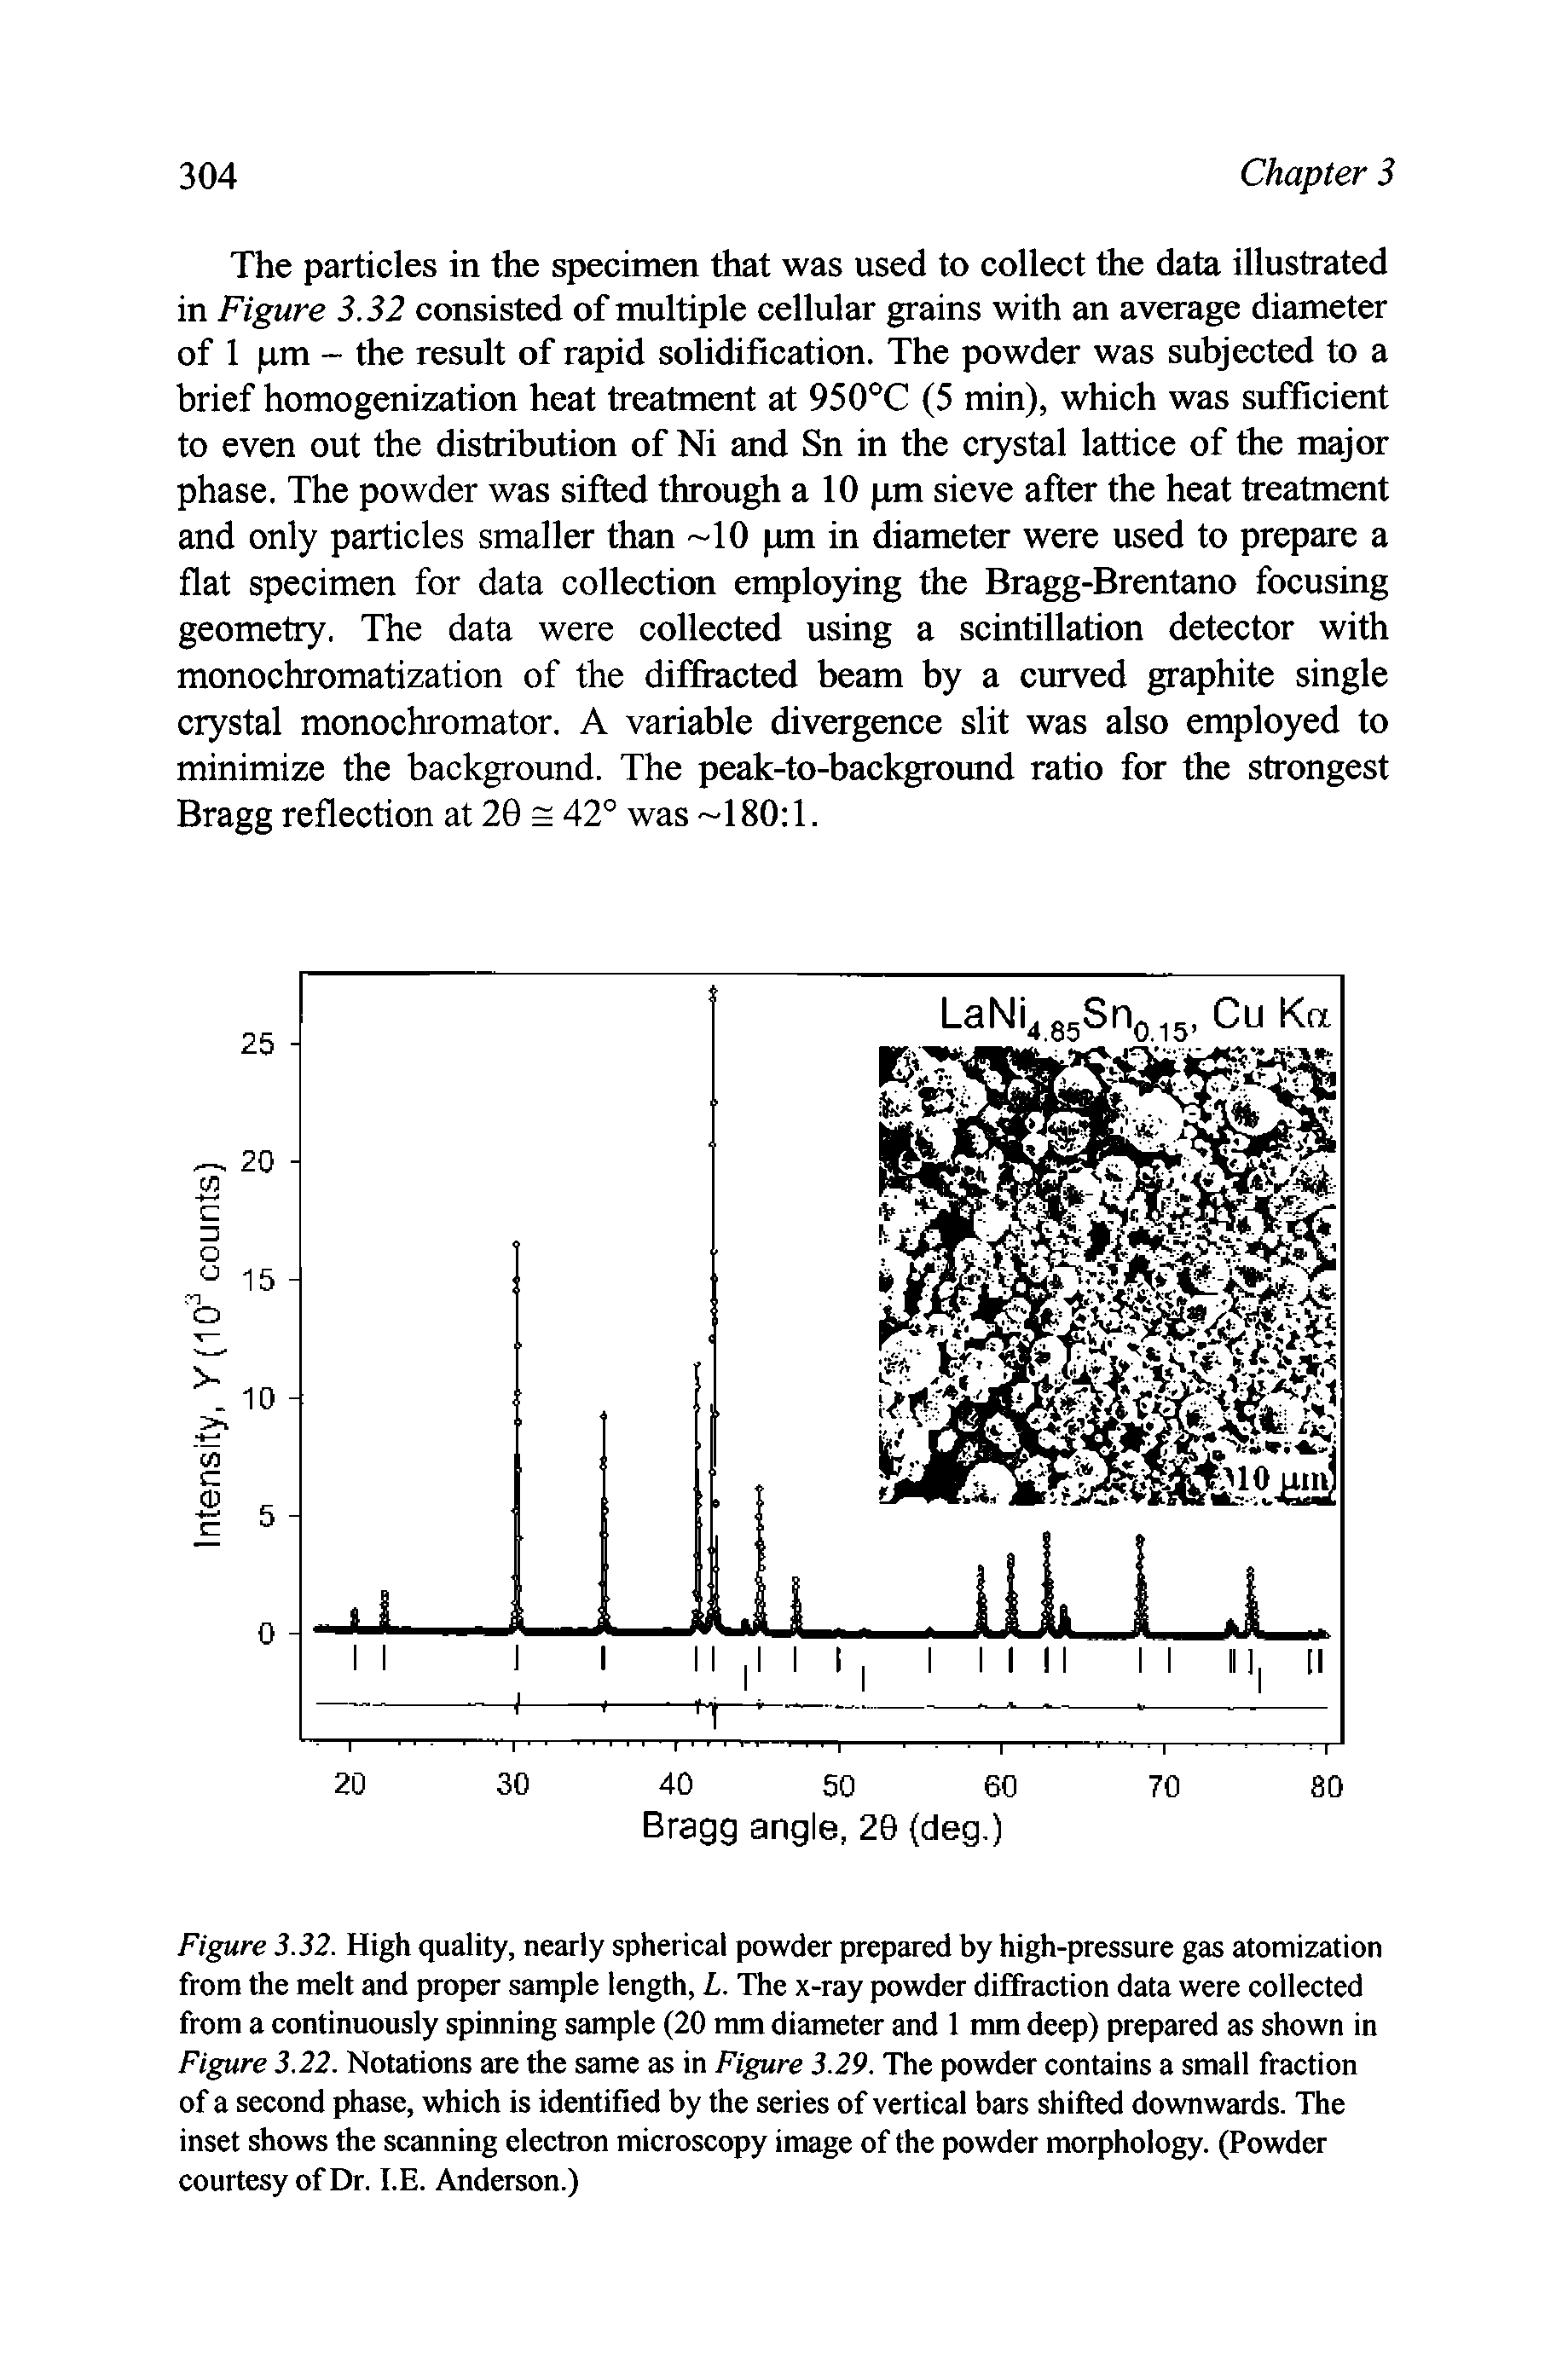 Figure 3.32. High quality, nearly spherical powder prepared by high-pressure gas atomization from the melt and proper sample length, L. The x-ray powder diffraction data were collected from a continuously spinning sample (20 mm diameter and 1 mm deep) prepared as shown in Figure 3.22. Notations are the same as in Figure 3.29. The powder contains a small fraction of a second phase, which is identified by the series of vertical bars shifted downwards. The inset shows the scanning electron microscopy image of the powder morphology. (Powder courtesy of Dr. I.E. Anderson.)...